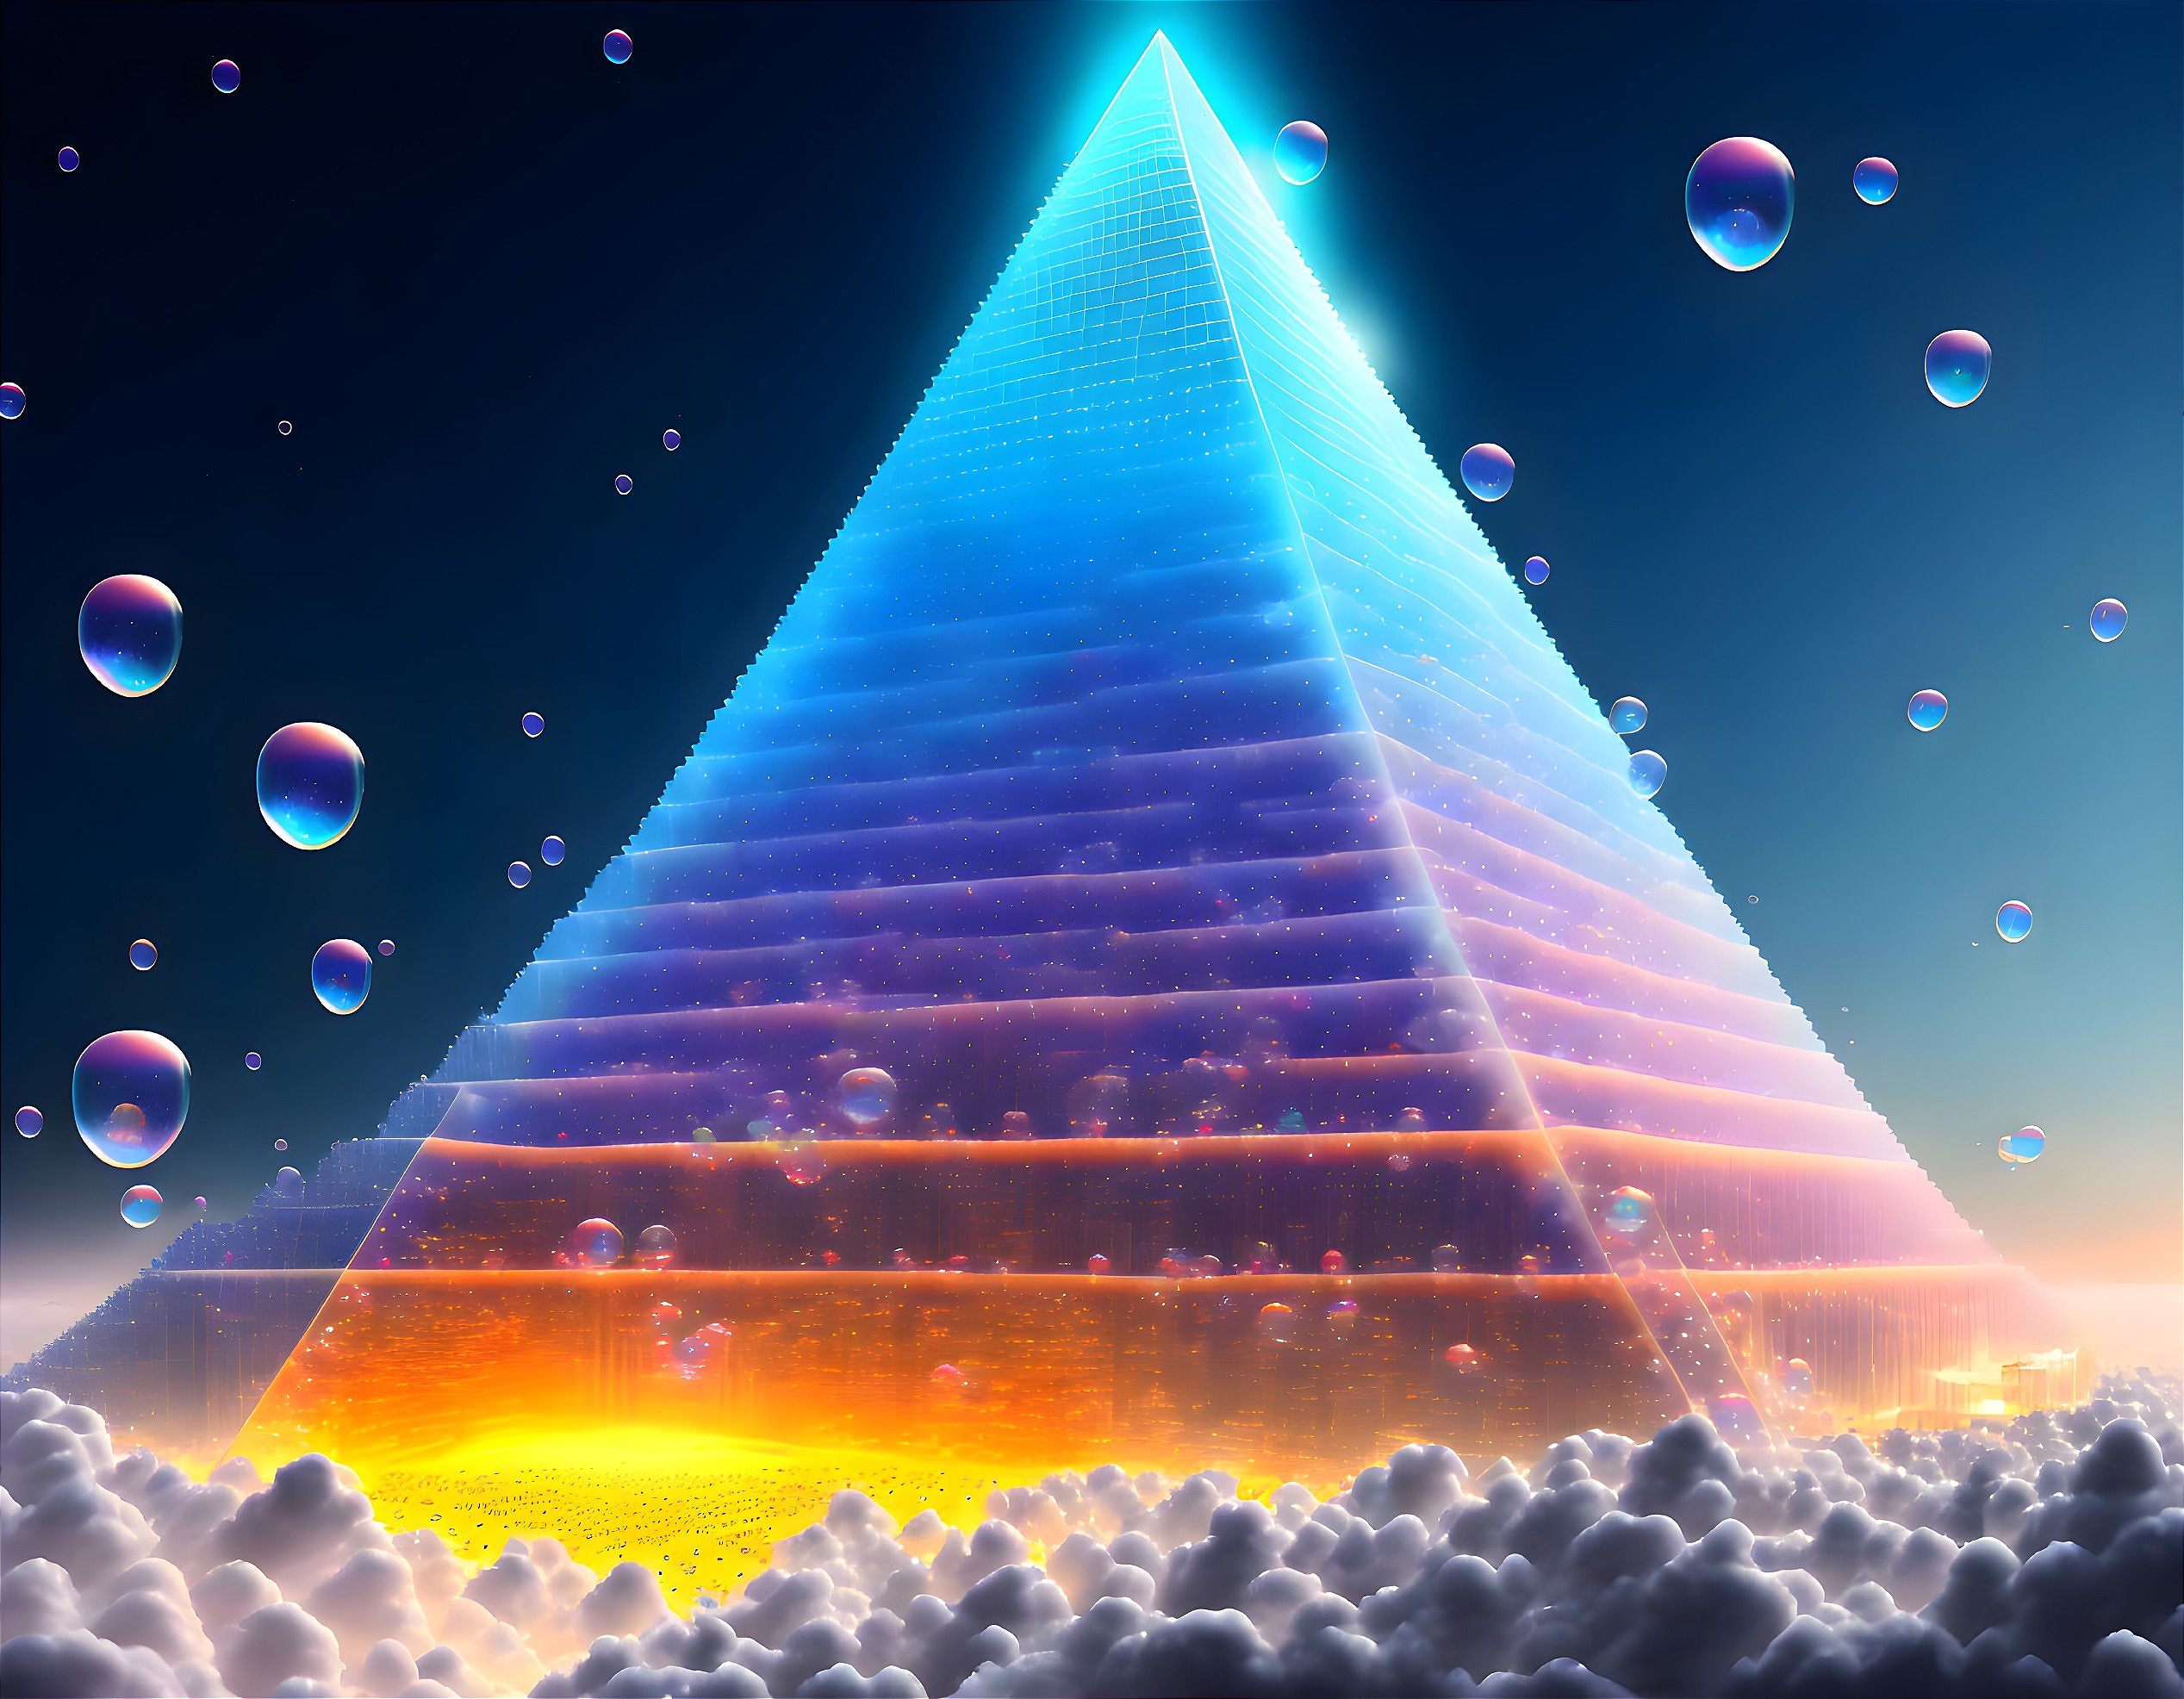 Neon pyramid in twilight sky with bubbles and misty landscape